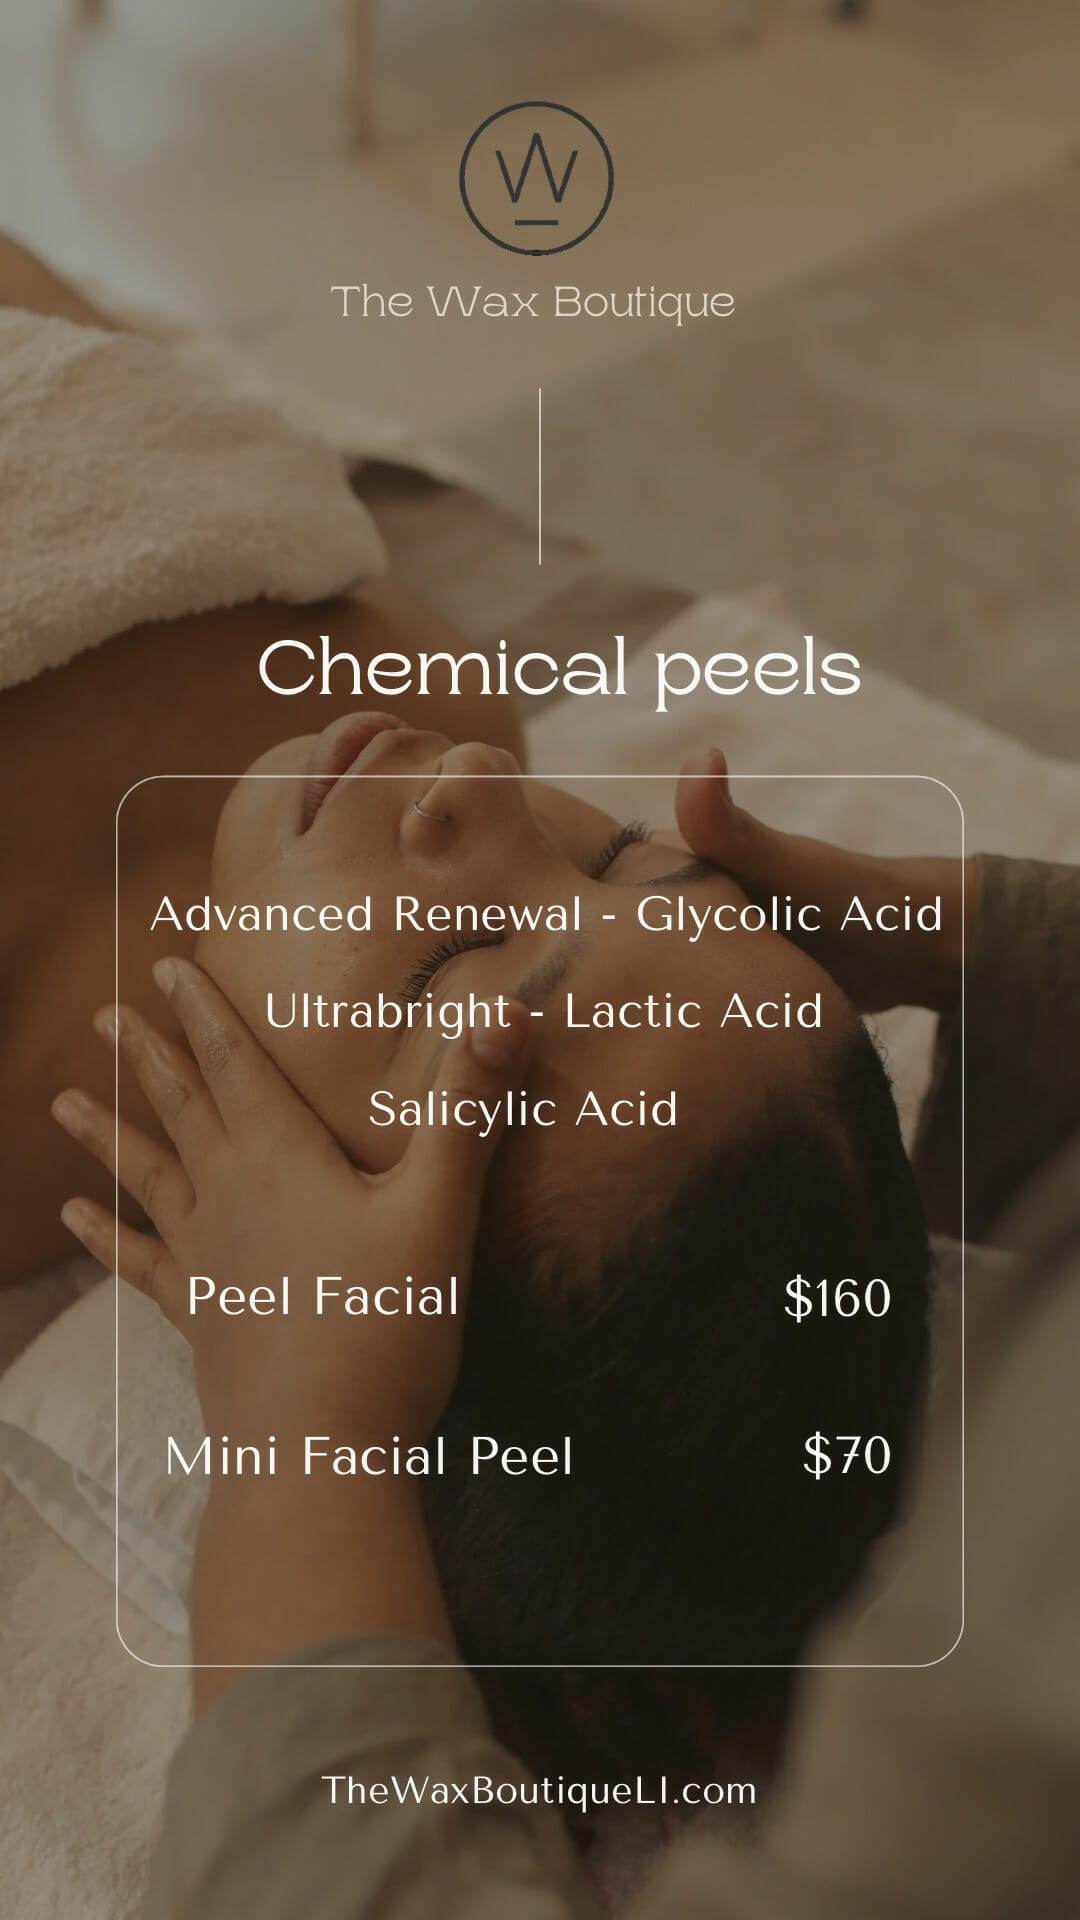 Long Island facial from The Wax Boutique - chemical peel service